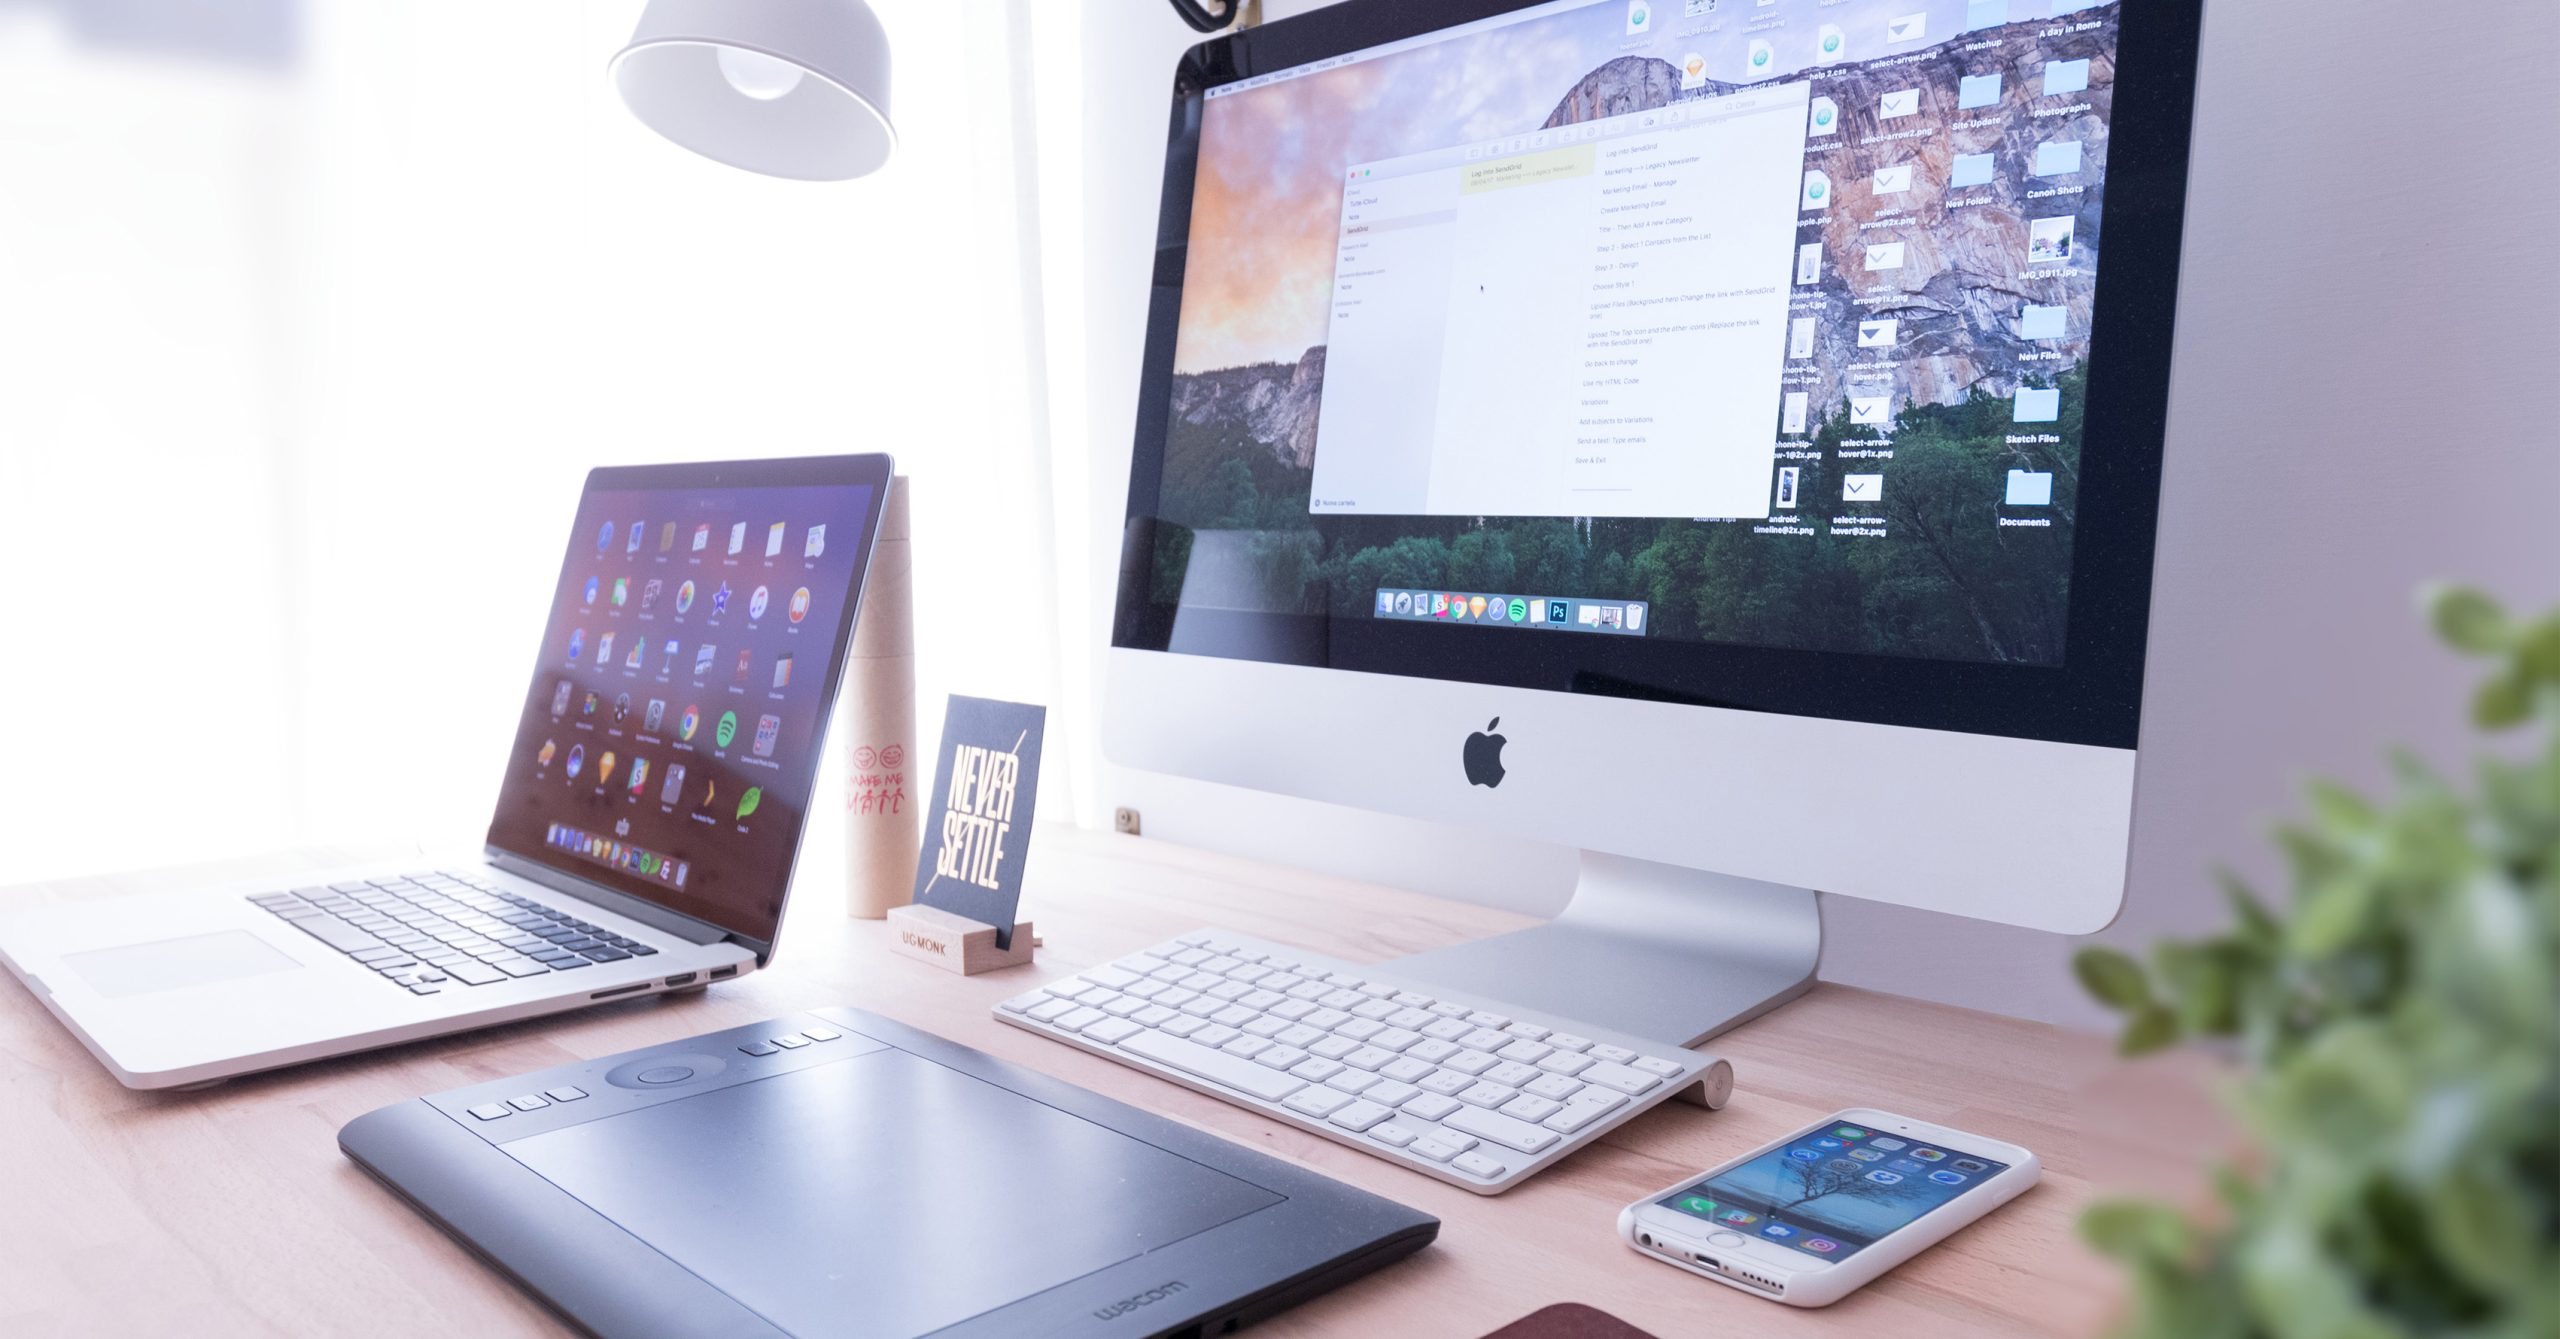 A collection of Apple devices, including a PC, laptop, iPad and iPhone on a desk